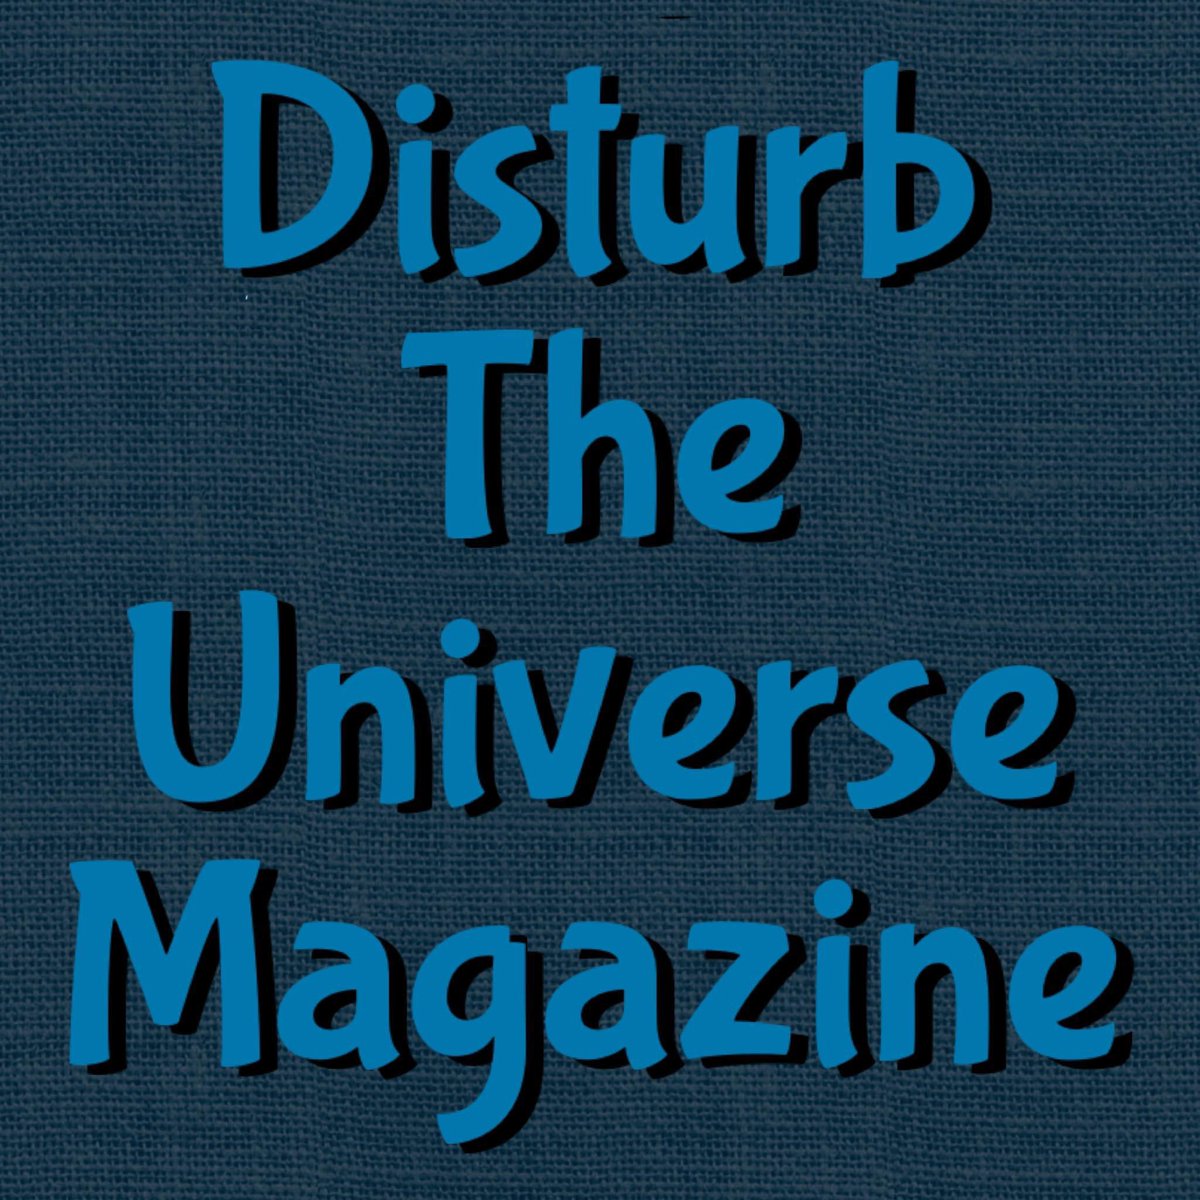 Up today at Disturb The Universe Magazine 

Eve by Stephen Jarrell Williams

disturbtheuniversemagazine.com/2024/05/eve-by…

#publishedwriting #disturbtheuniversemagazine #published #writingcommunity #poetry #writing #publishedpoetry #poetrylovers #poetrytwitter #poetrycommunity